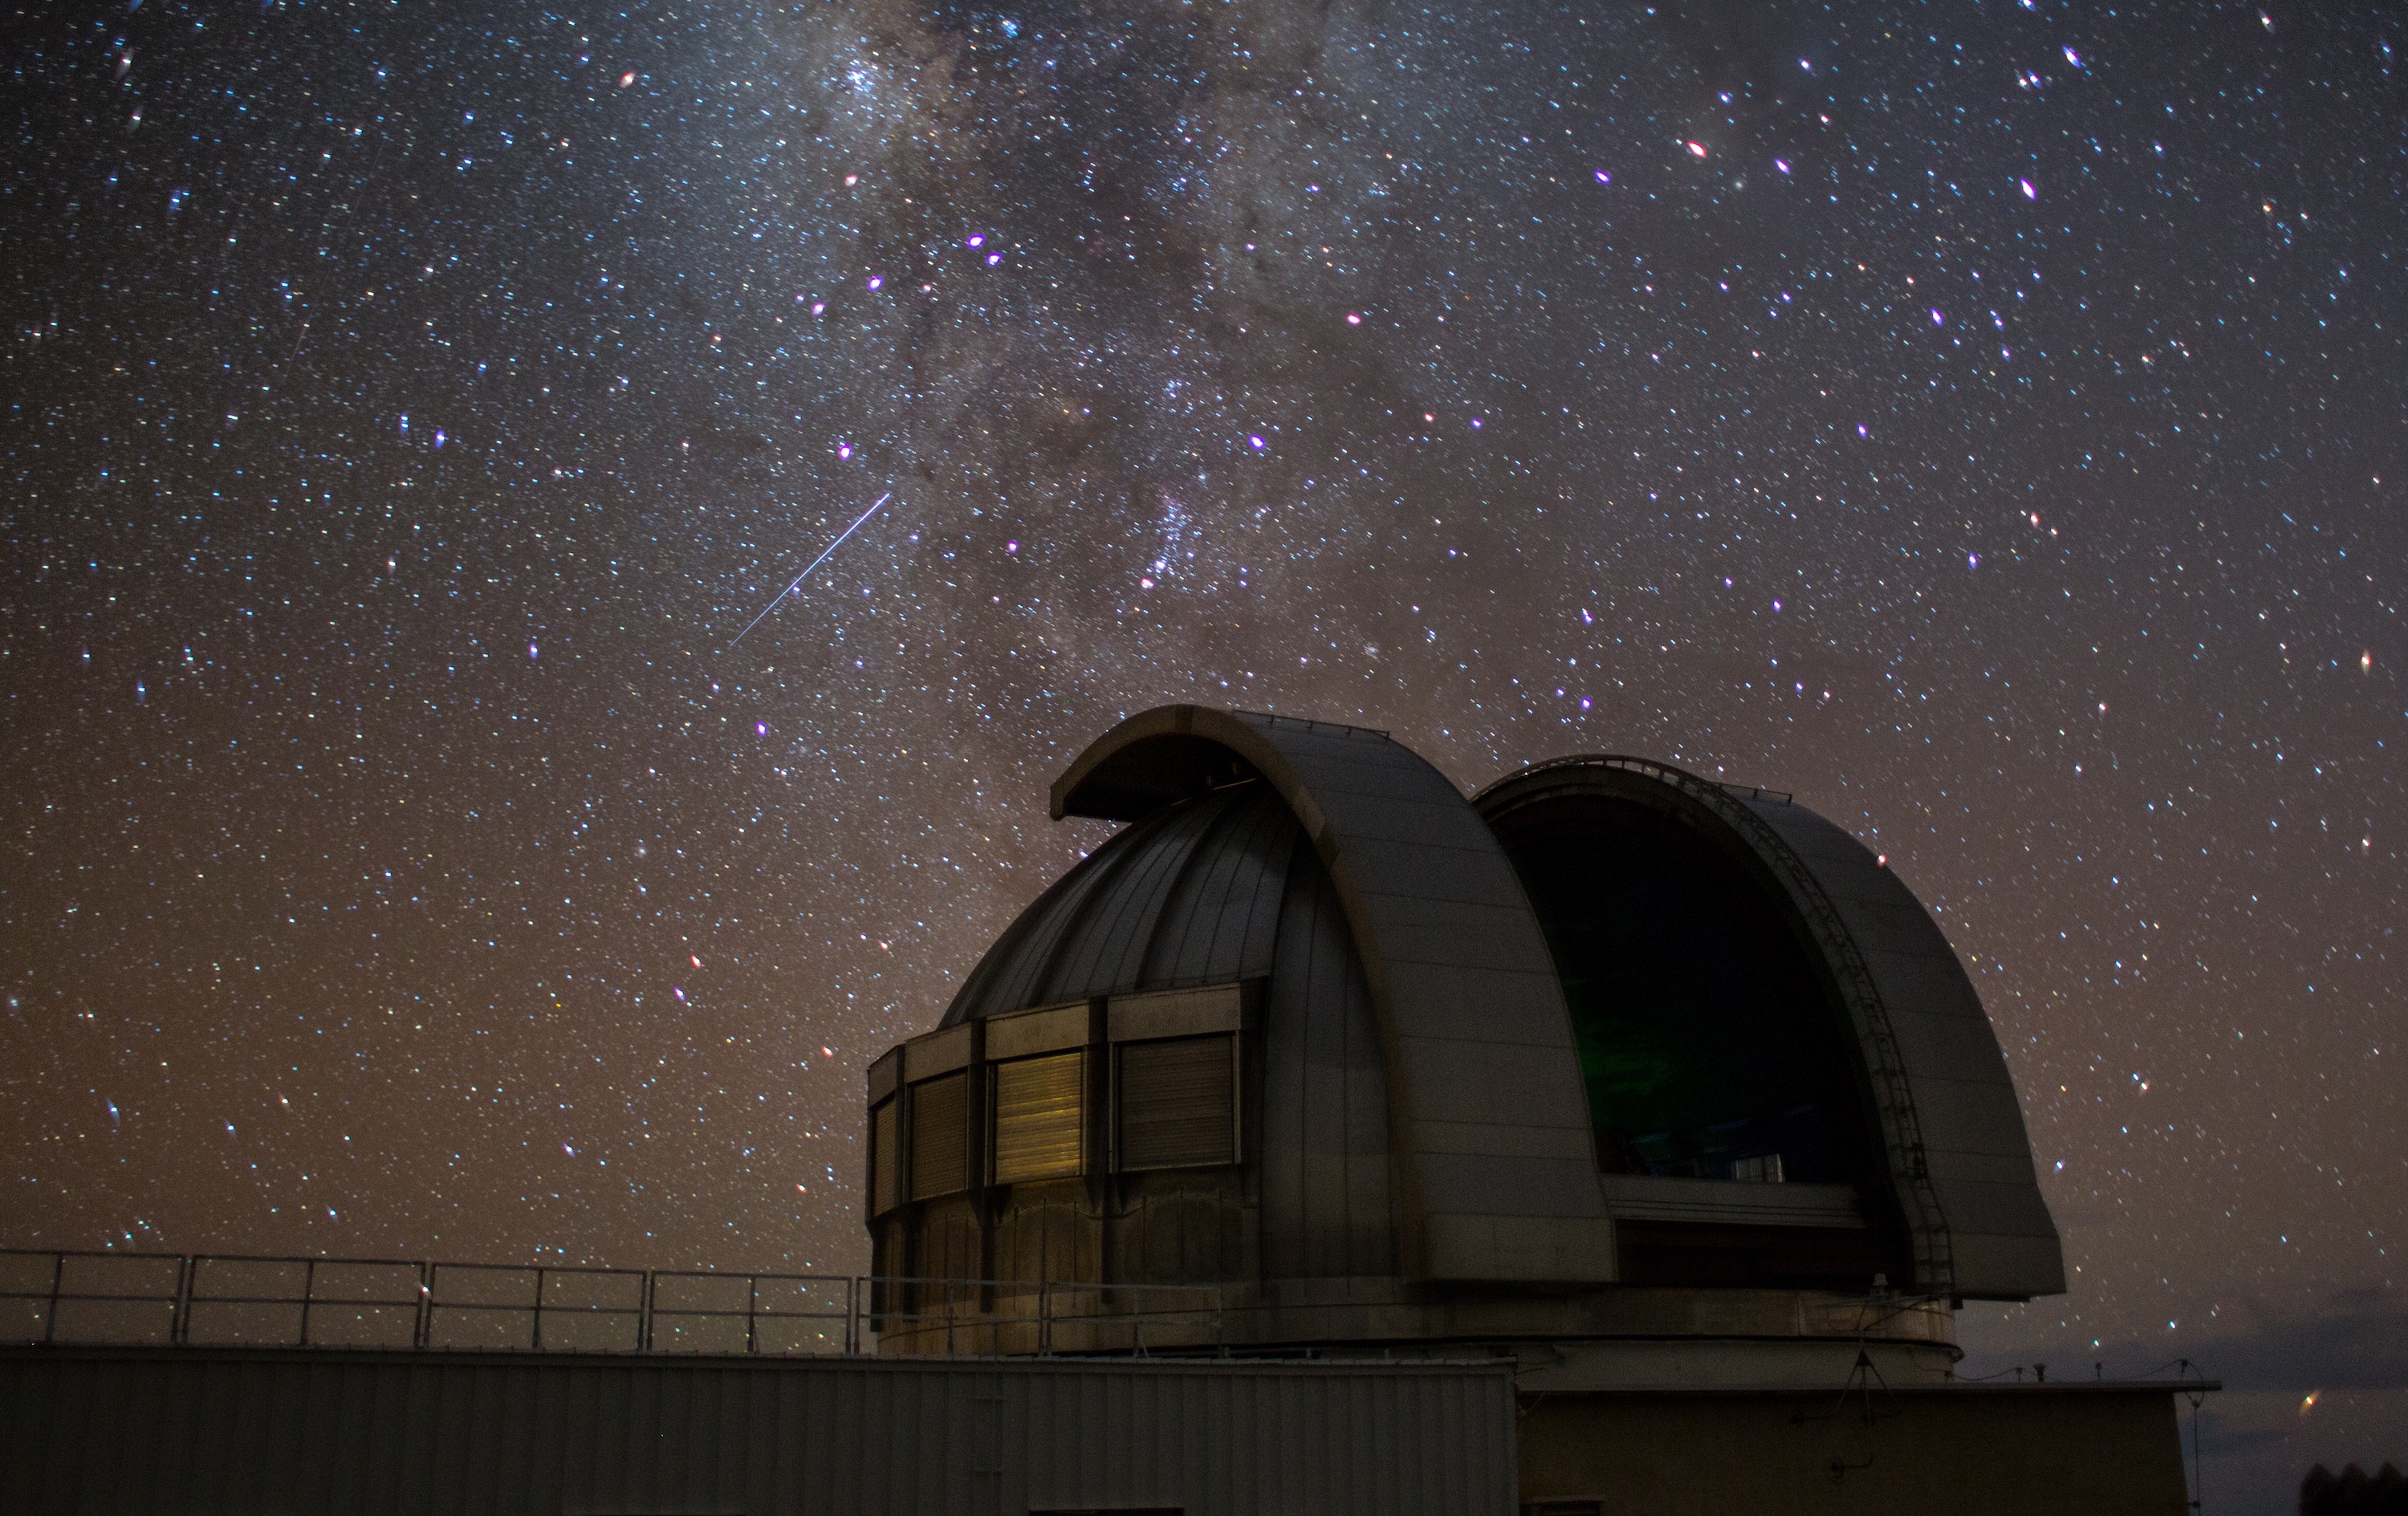 An observatory at night with stars